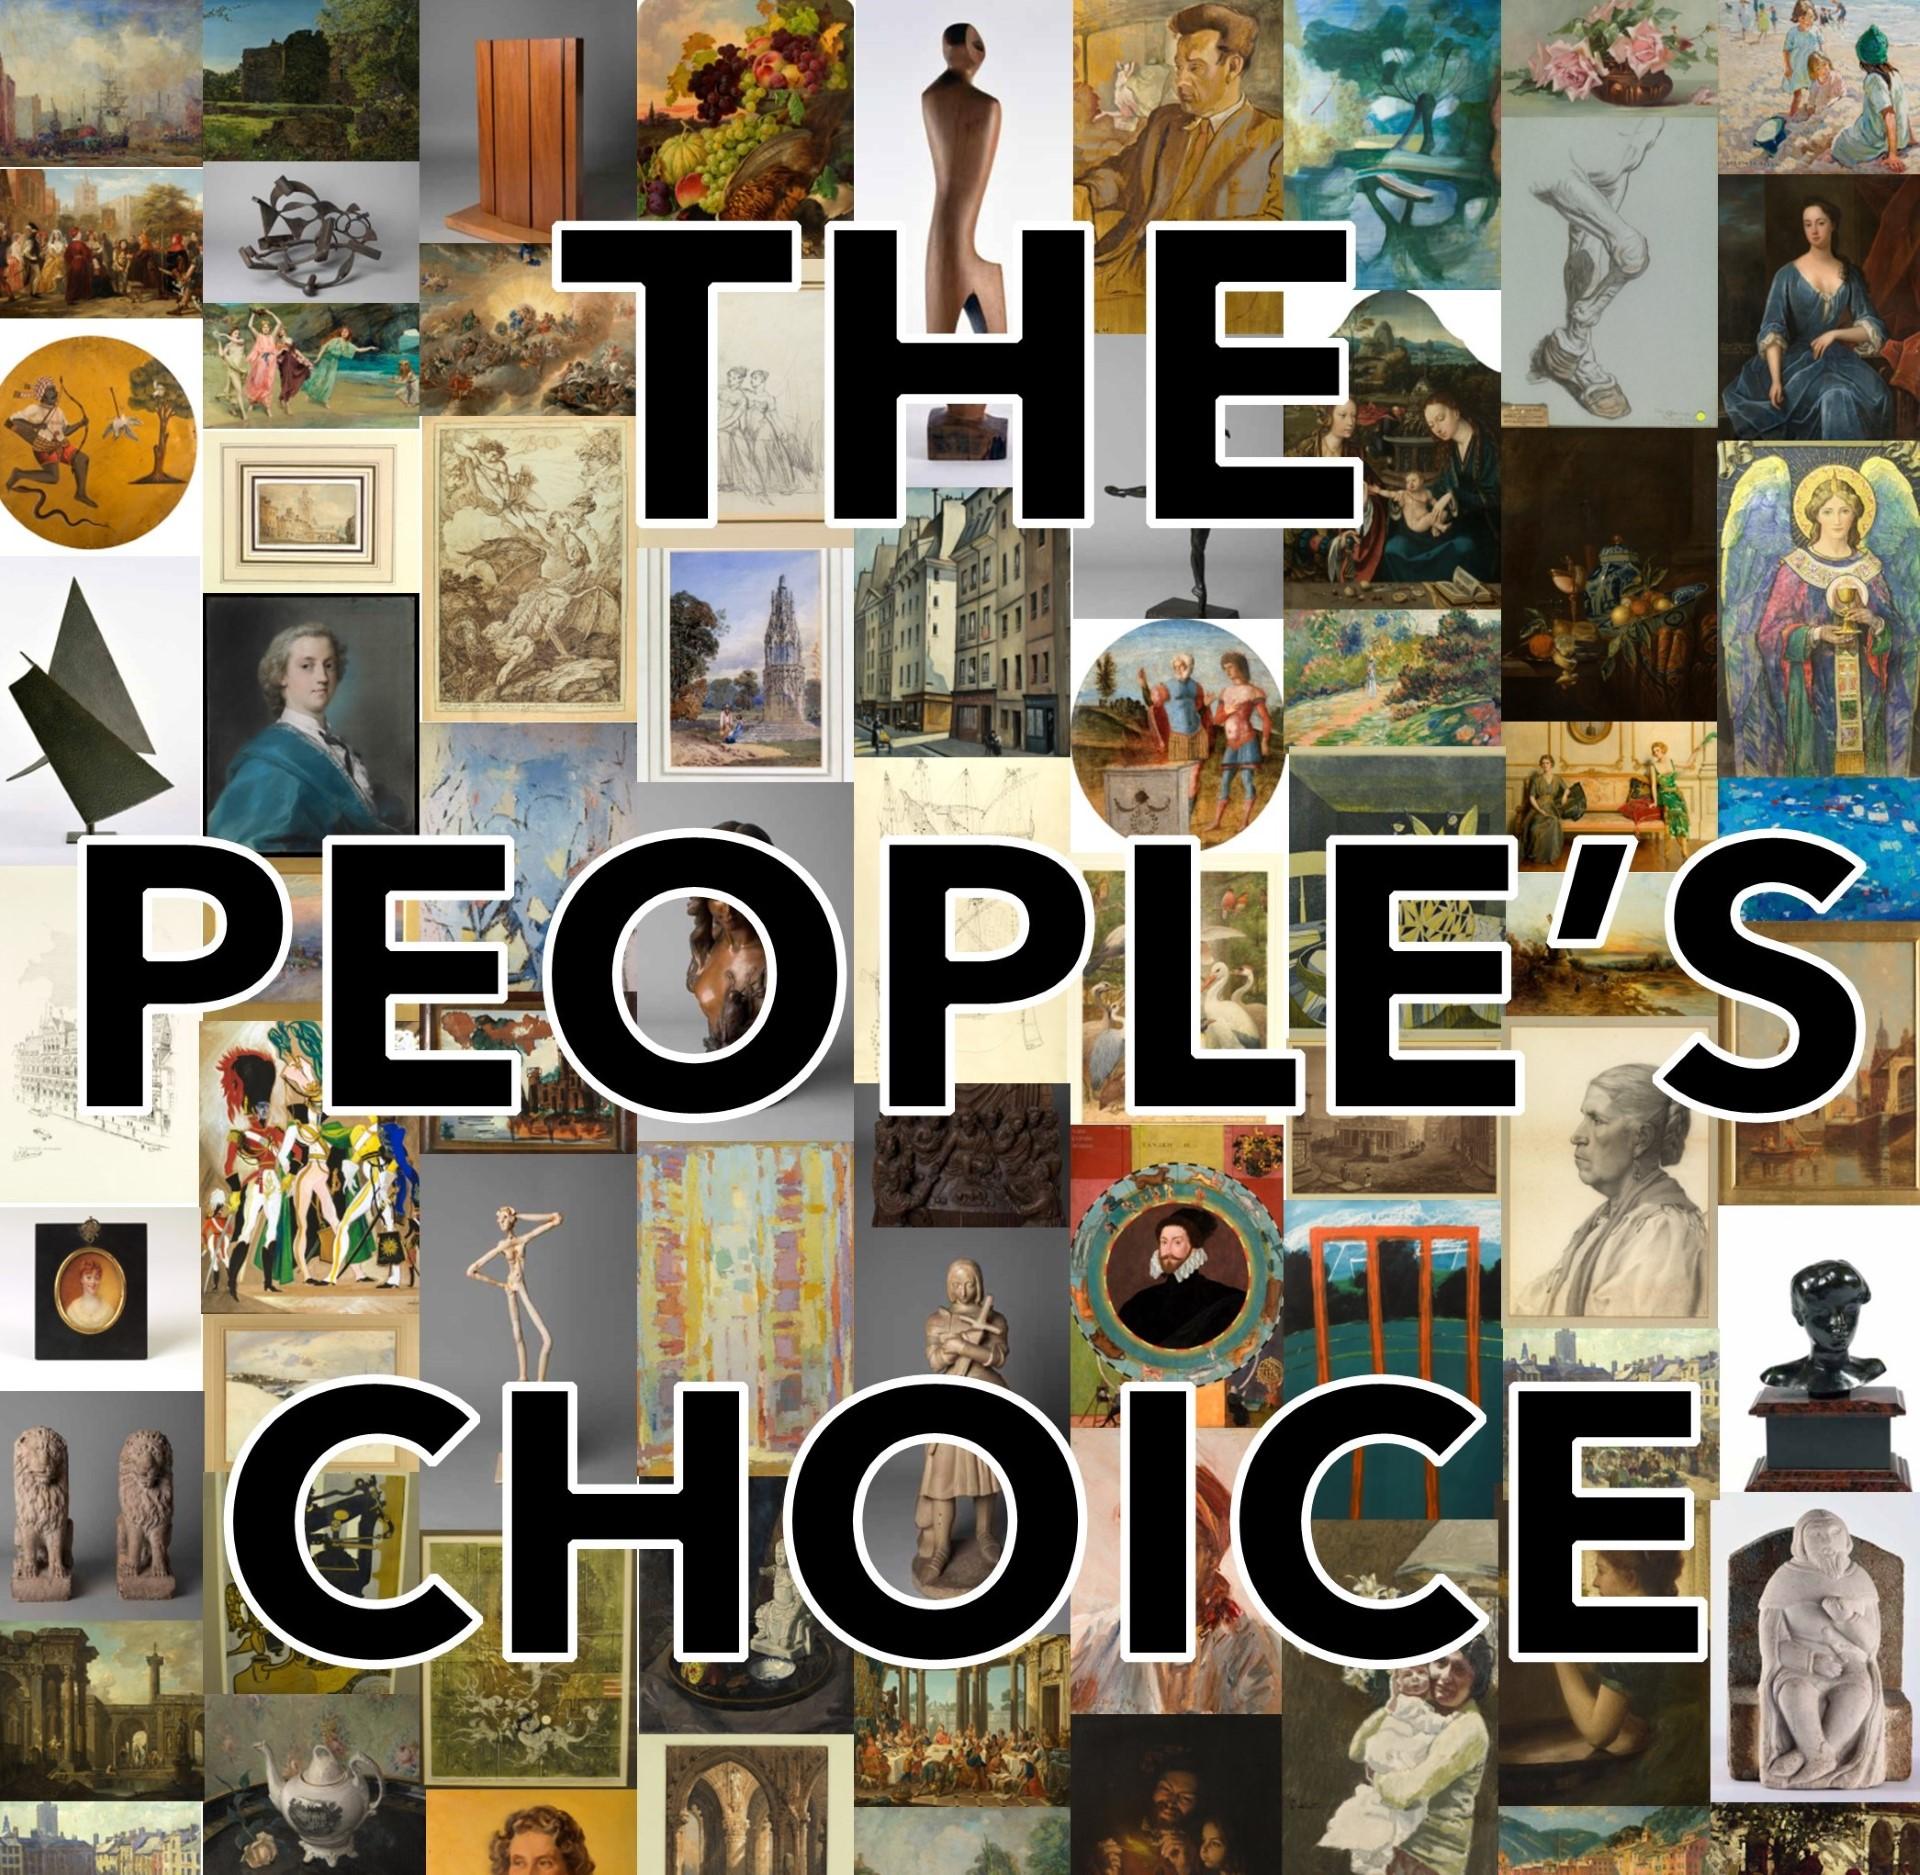 image link to The People's Choice Exhibition page.